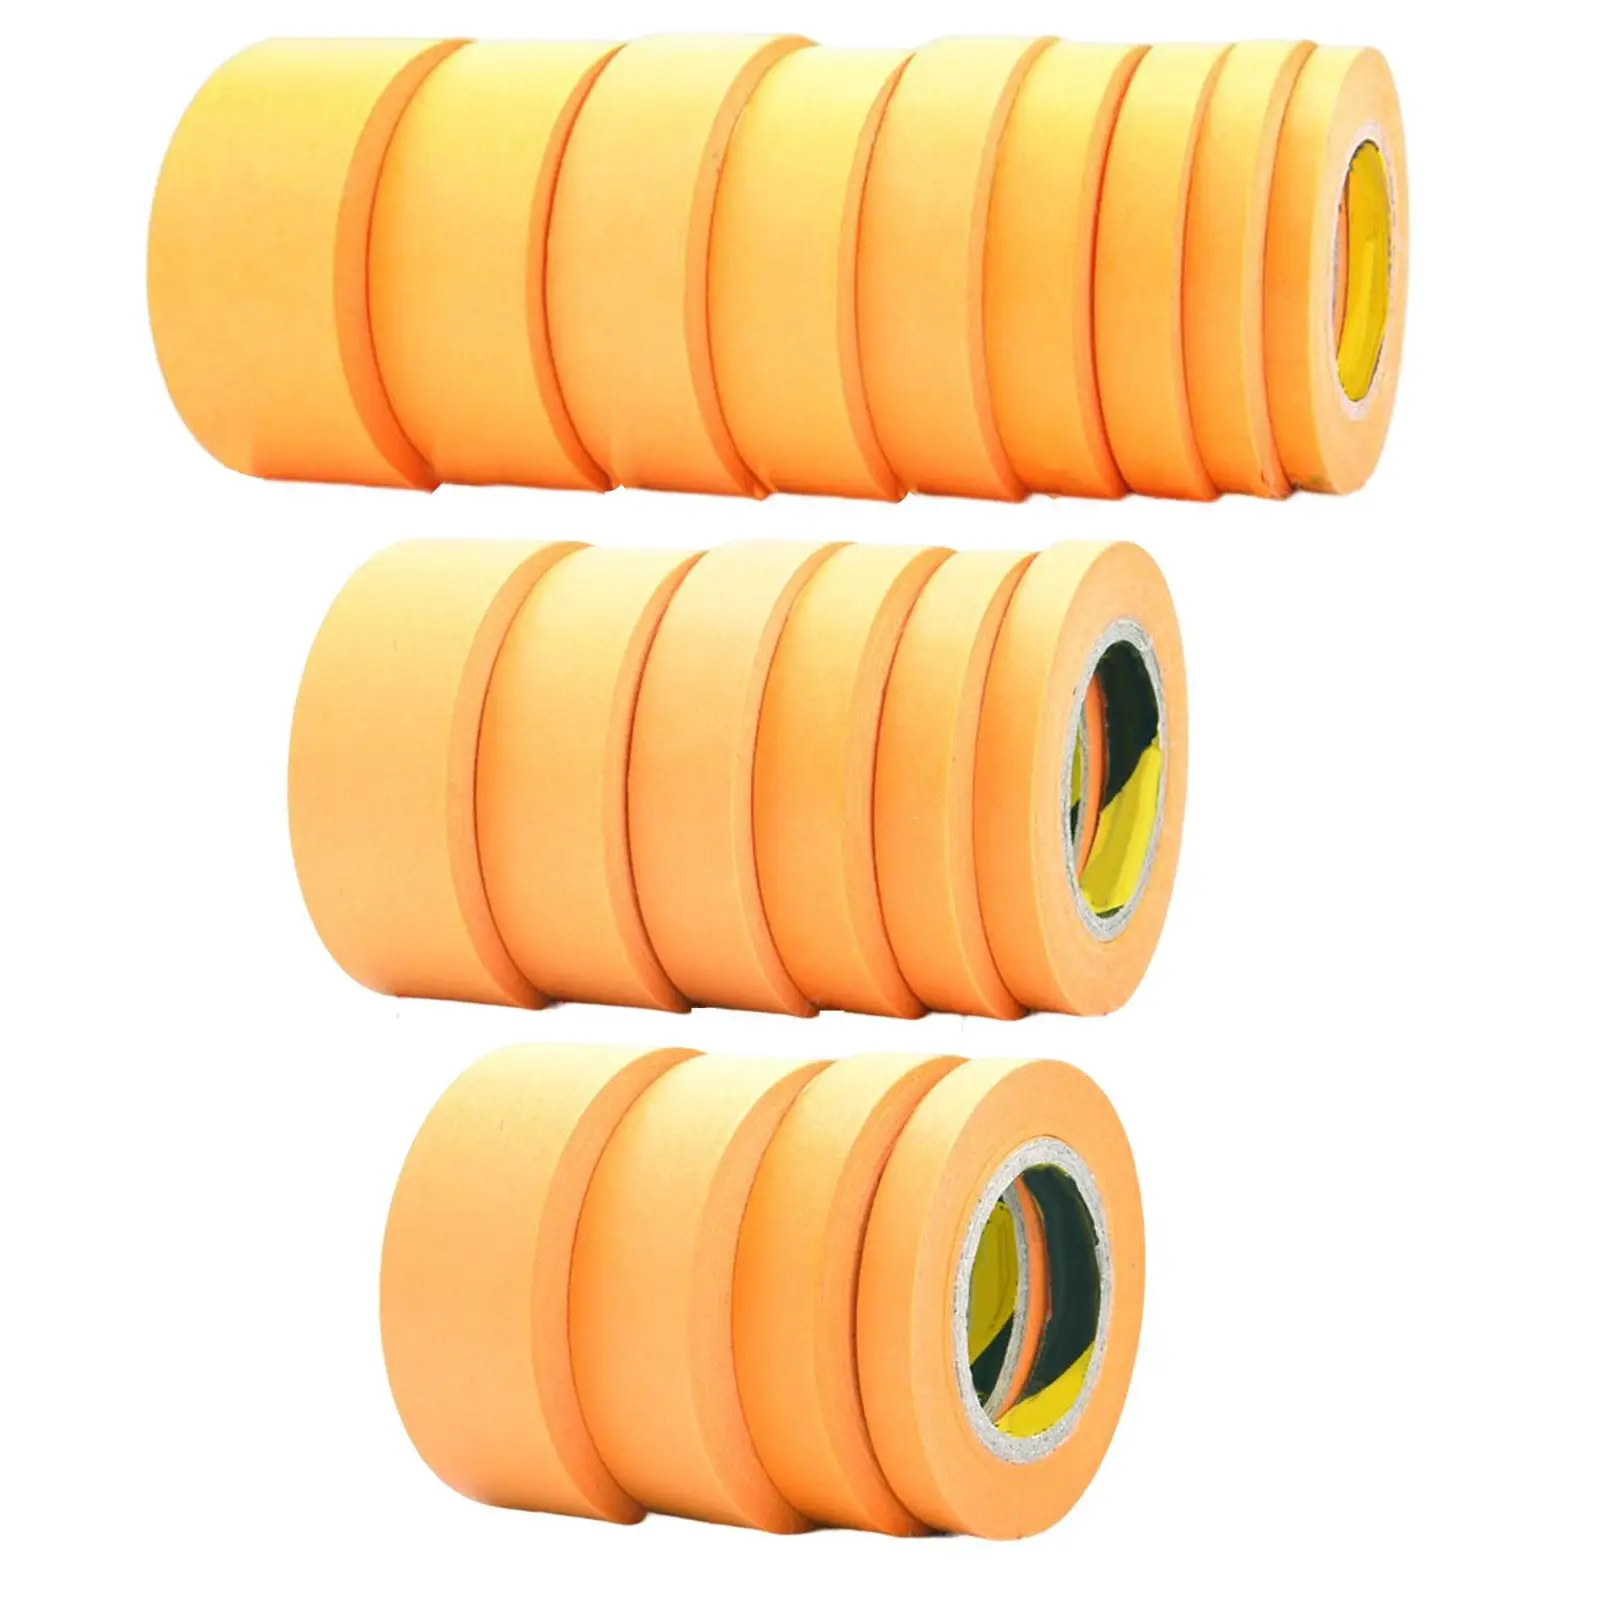 Pinstripe Tape Masking Covers Tape Multi Size Model Making Tape Painting Model Masking Tape Painters Tape for Painting Drawing